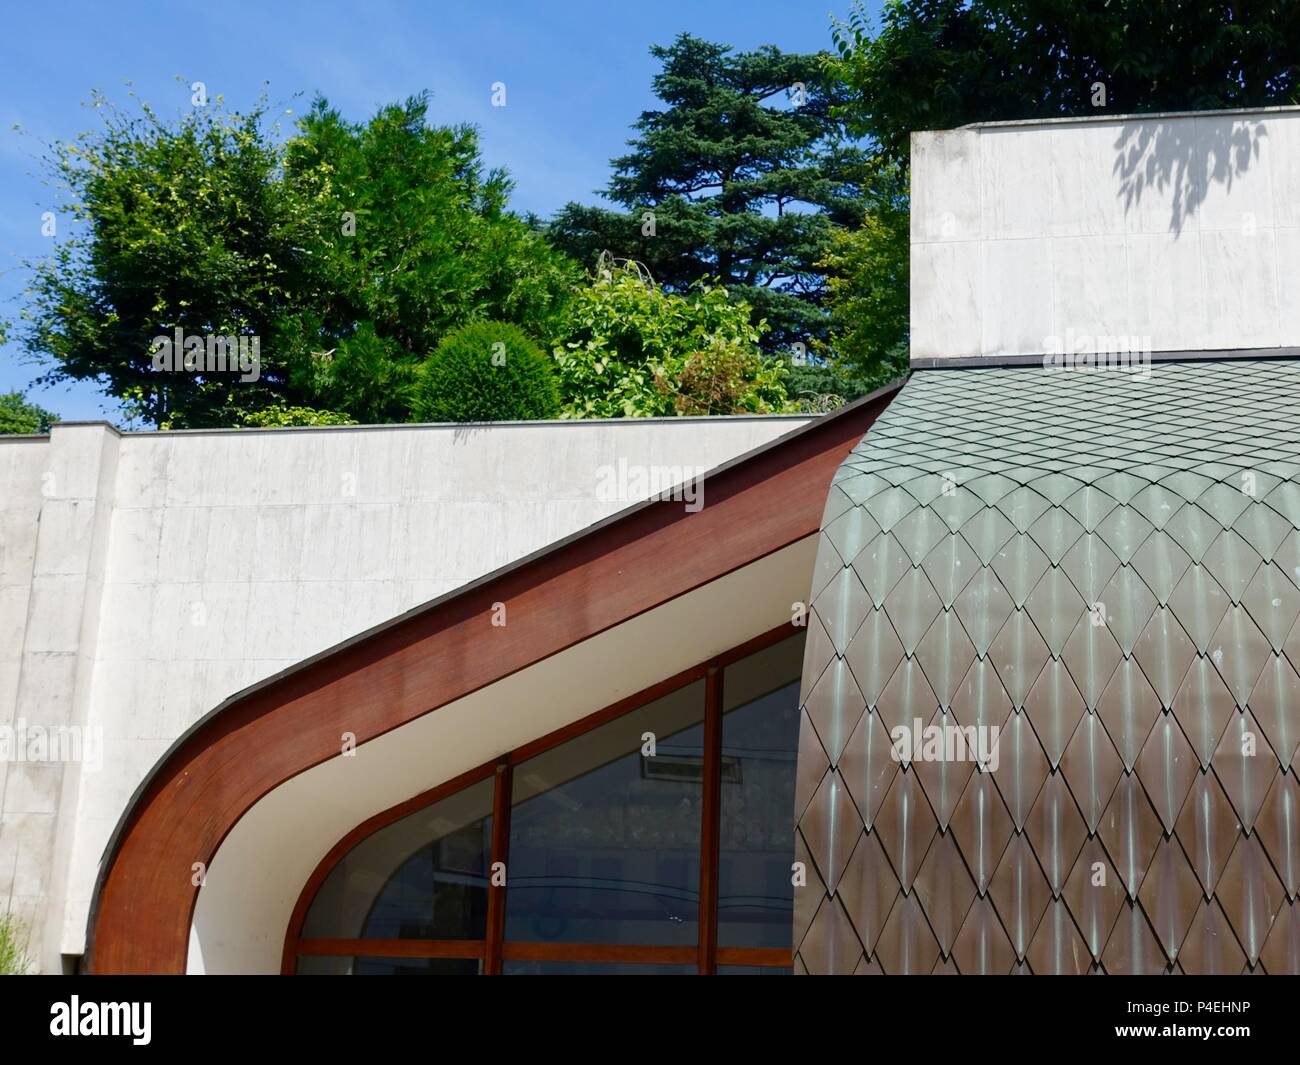 Graceful curve of the roof of the Alfred Museum, under renovation and expansion, June 2018, Bologne-Billancourt, France Stock Photo